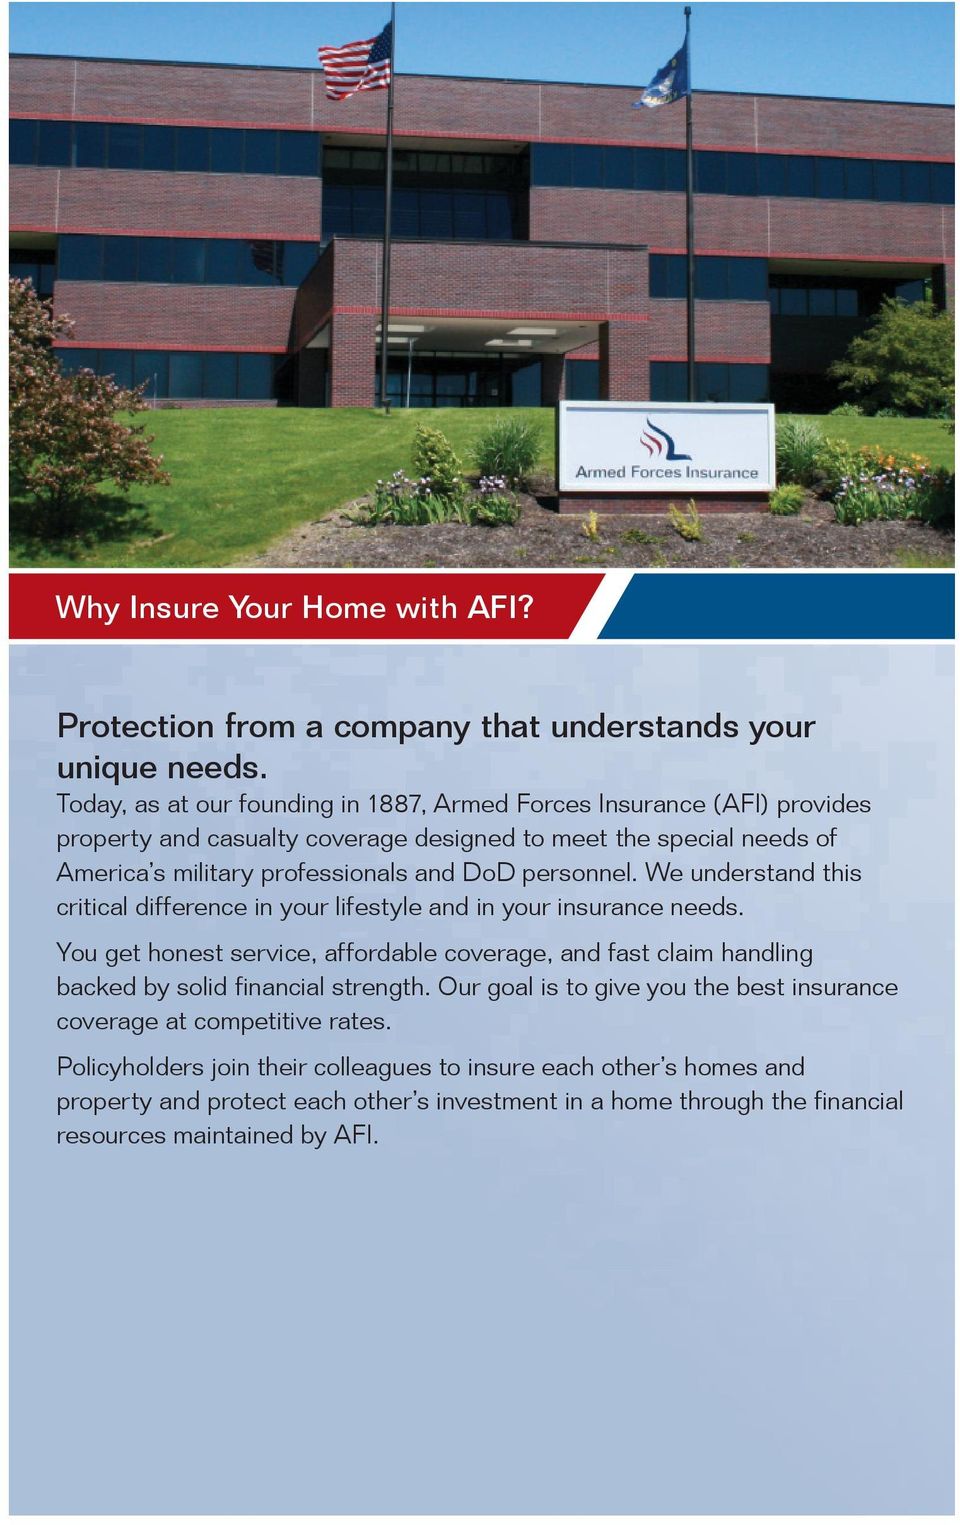 DoD personnel. We understand this critical difference in your lifestyle and in your insurance needs.